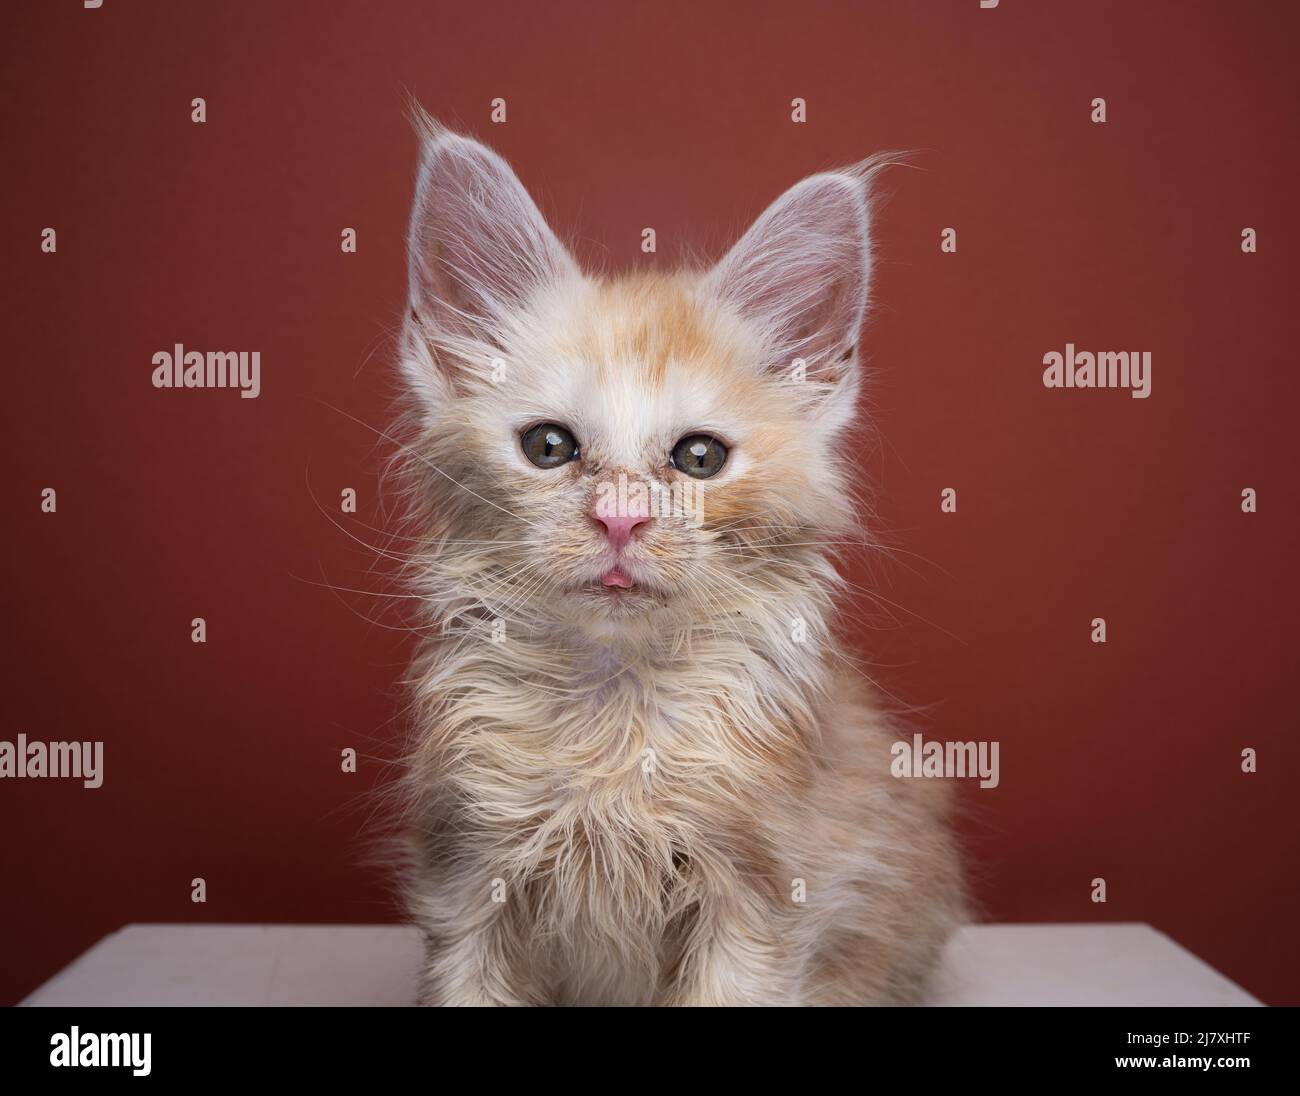 poor scruffy ginger kitten looking at camera portrait on red brown background with copy space Stock Photo